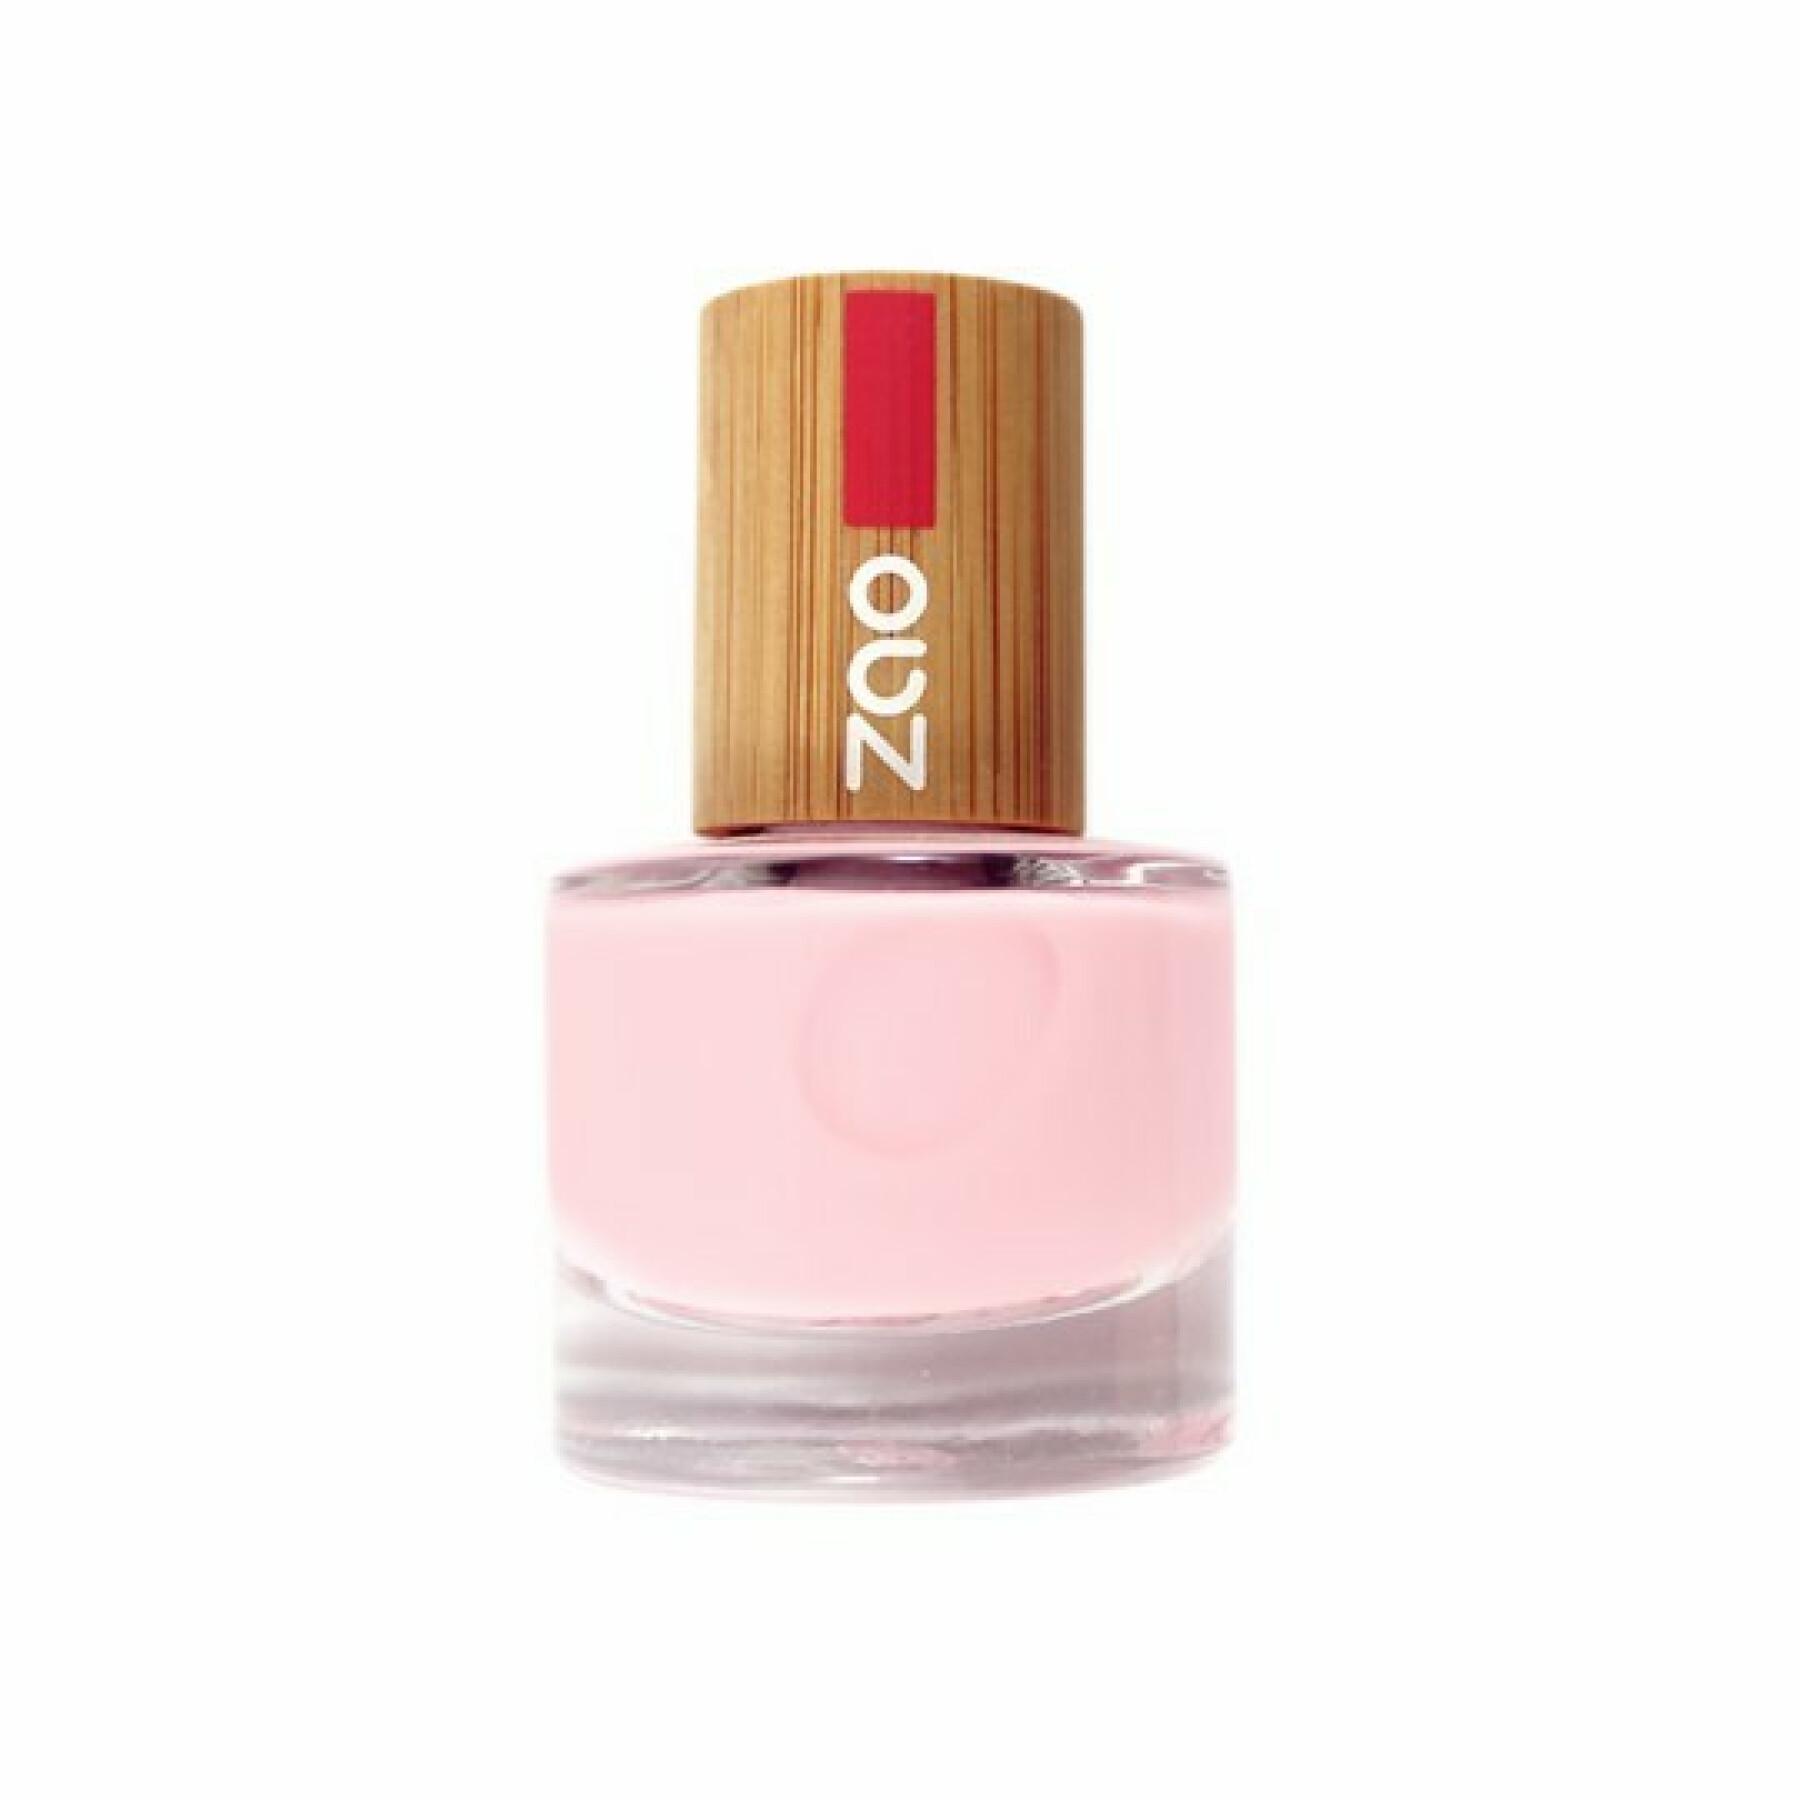 Vernis à ongles French manucure 643 rose femme Zao - 8 ml